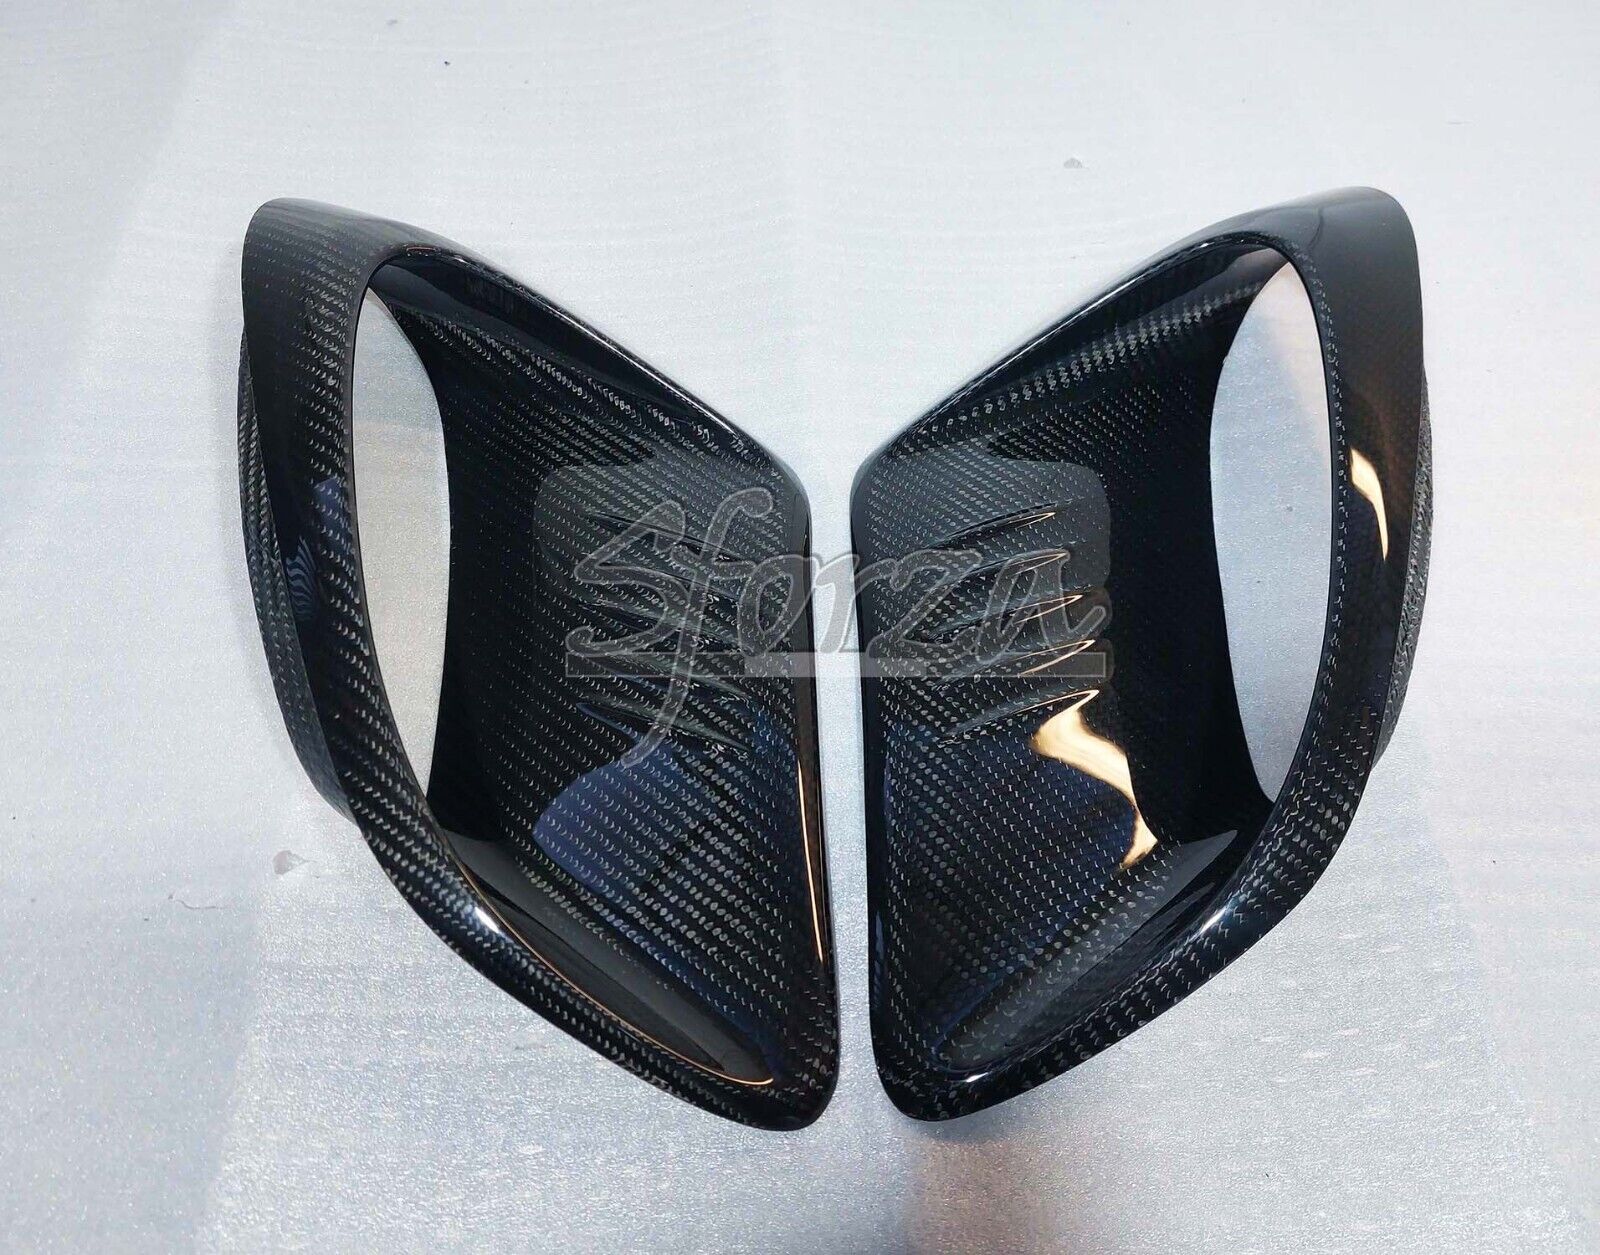 Porsche 911 991.2 GT3 RS  Carbon fiber side scoops air intakes - fits 991 Turbo